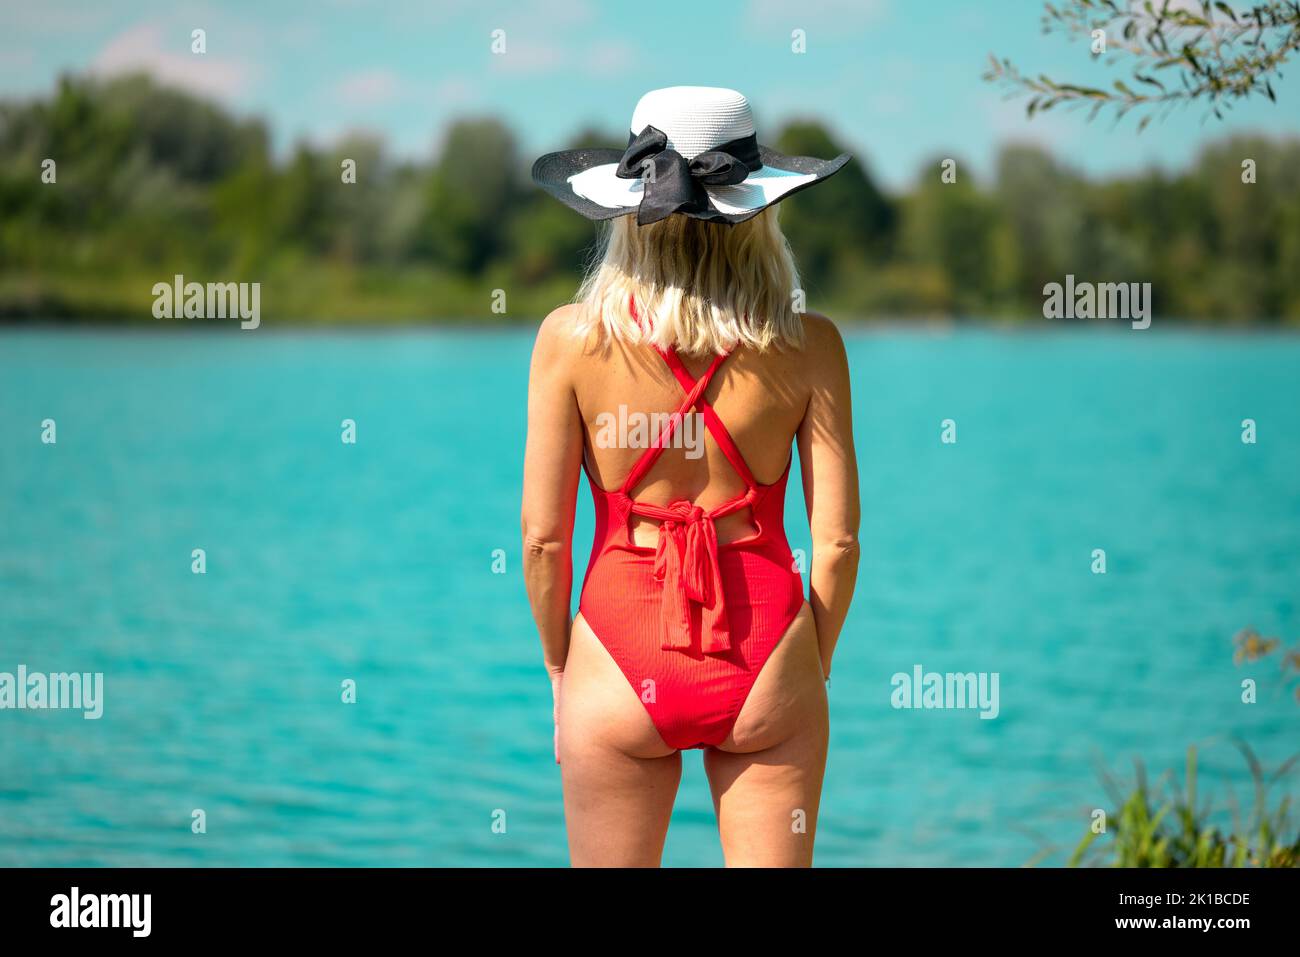 Rear view of a blonde woman with a black and white summer hat in a red swimsuit in front of a beautiful lake Stock Photo